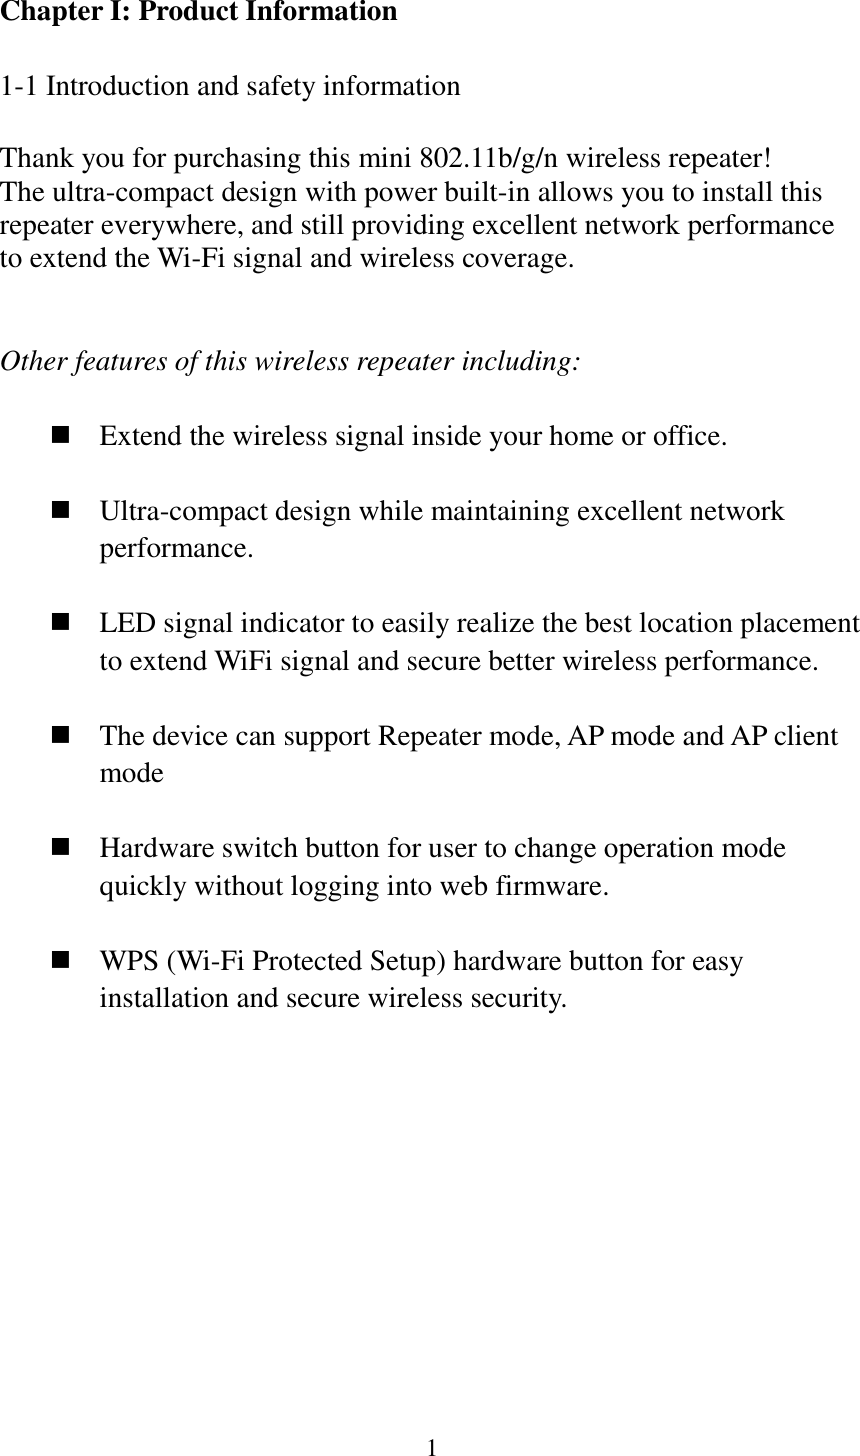 1  Chapter I: Product Information  1-1 Introduction and safety information  Thank you for purchasing this mini 802.11b/g/n wireless repeater! The ultra-compact design with power built-in allows you to install this repeater everywhere, and still providing excellent network performance to extend the Wi-Fi signal and wireless coverage.     Other features of this wireless repeater including:   Extend the wireless signal inside your home or office.   Ultra-compact design while maintaining excellent network performance.   LED signal indicator to easily realize the best location placement to extend WiFi signal and secure better wireless performance.       The device can support Repeater mode, AP mode and AP client mode   Hardware switch button for user to change operation mode quickly without logging into web firmware.   WPS (Wi-Fi Protected Setup) hardware button for easy installation and secure wireless security.    